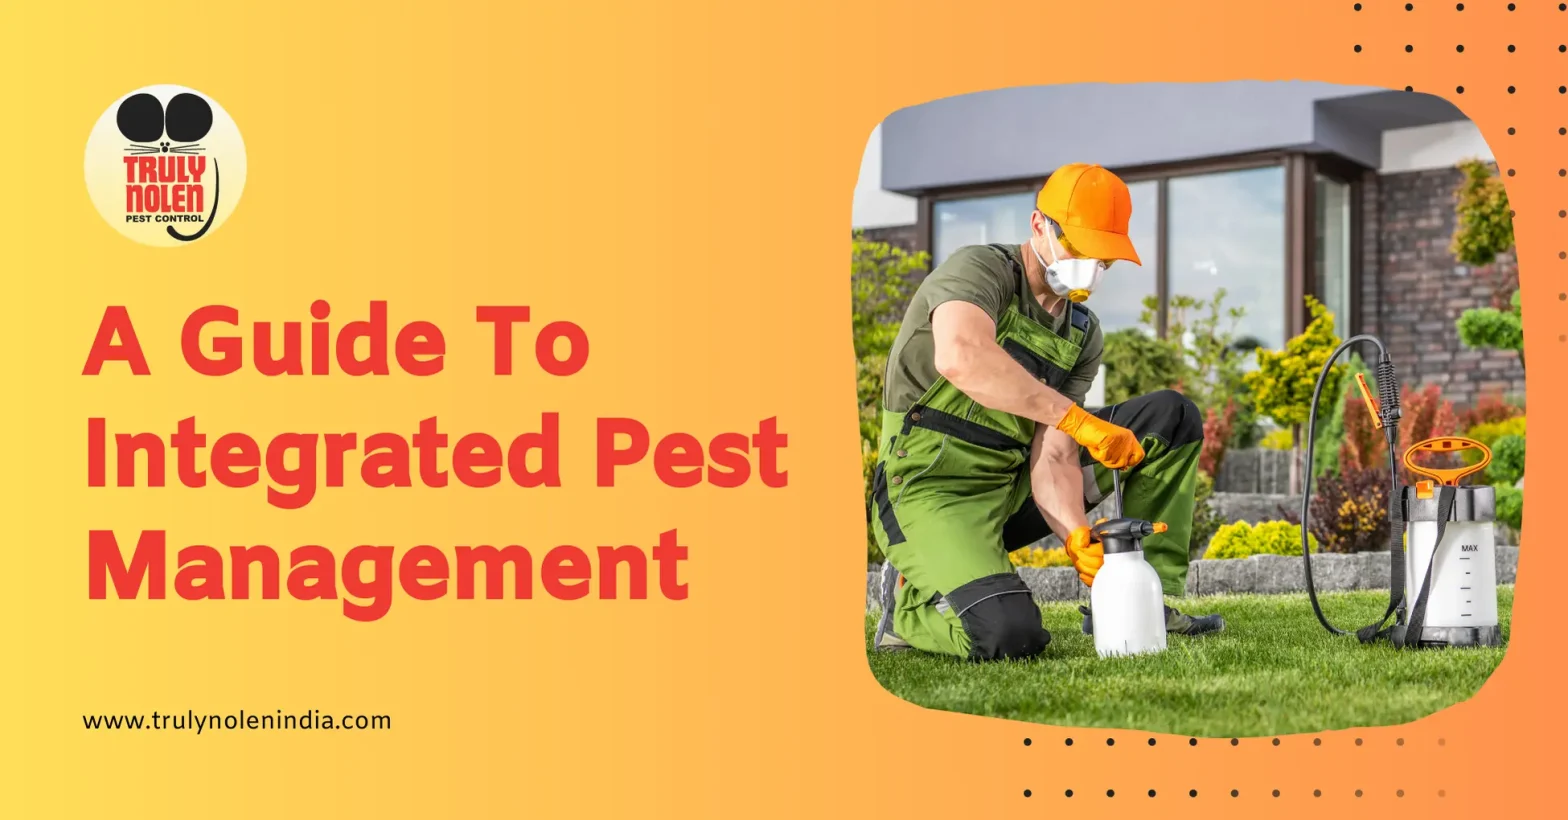 A Guide To Integrated Pest Management